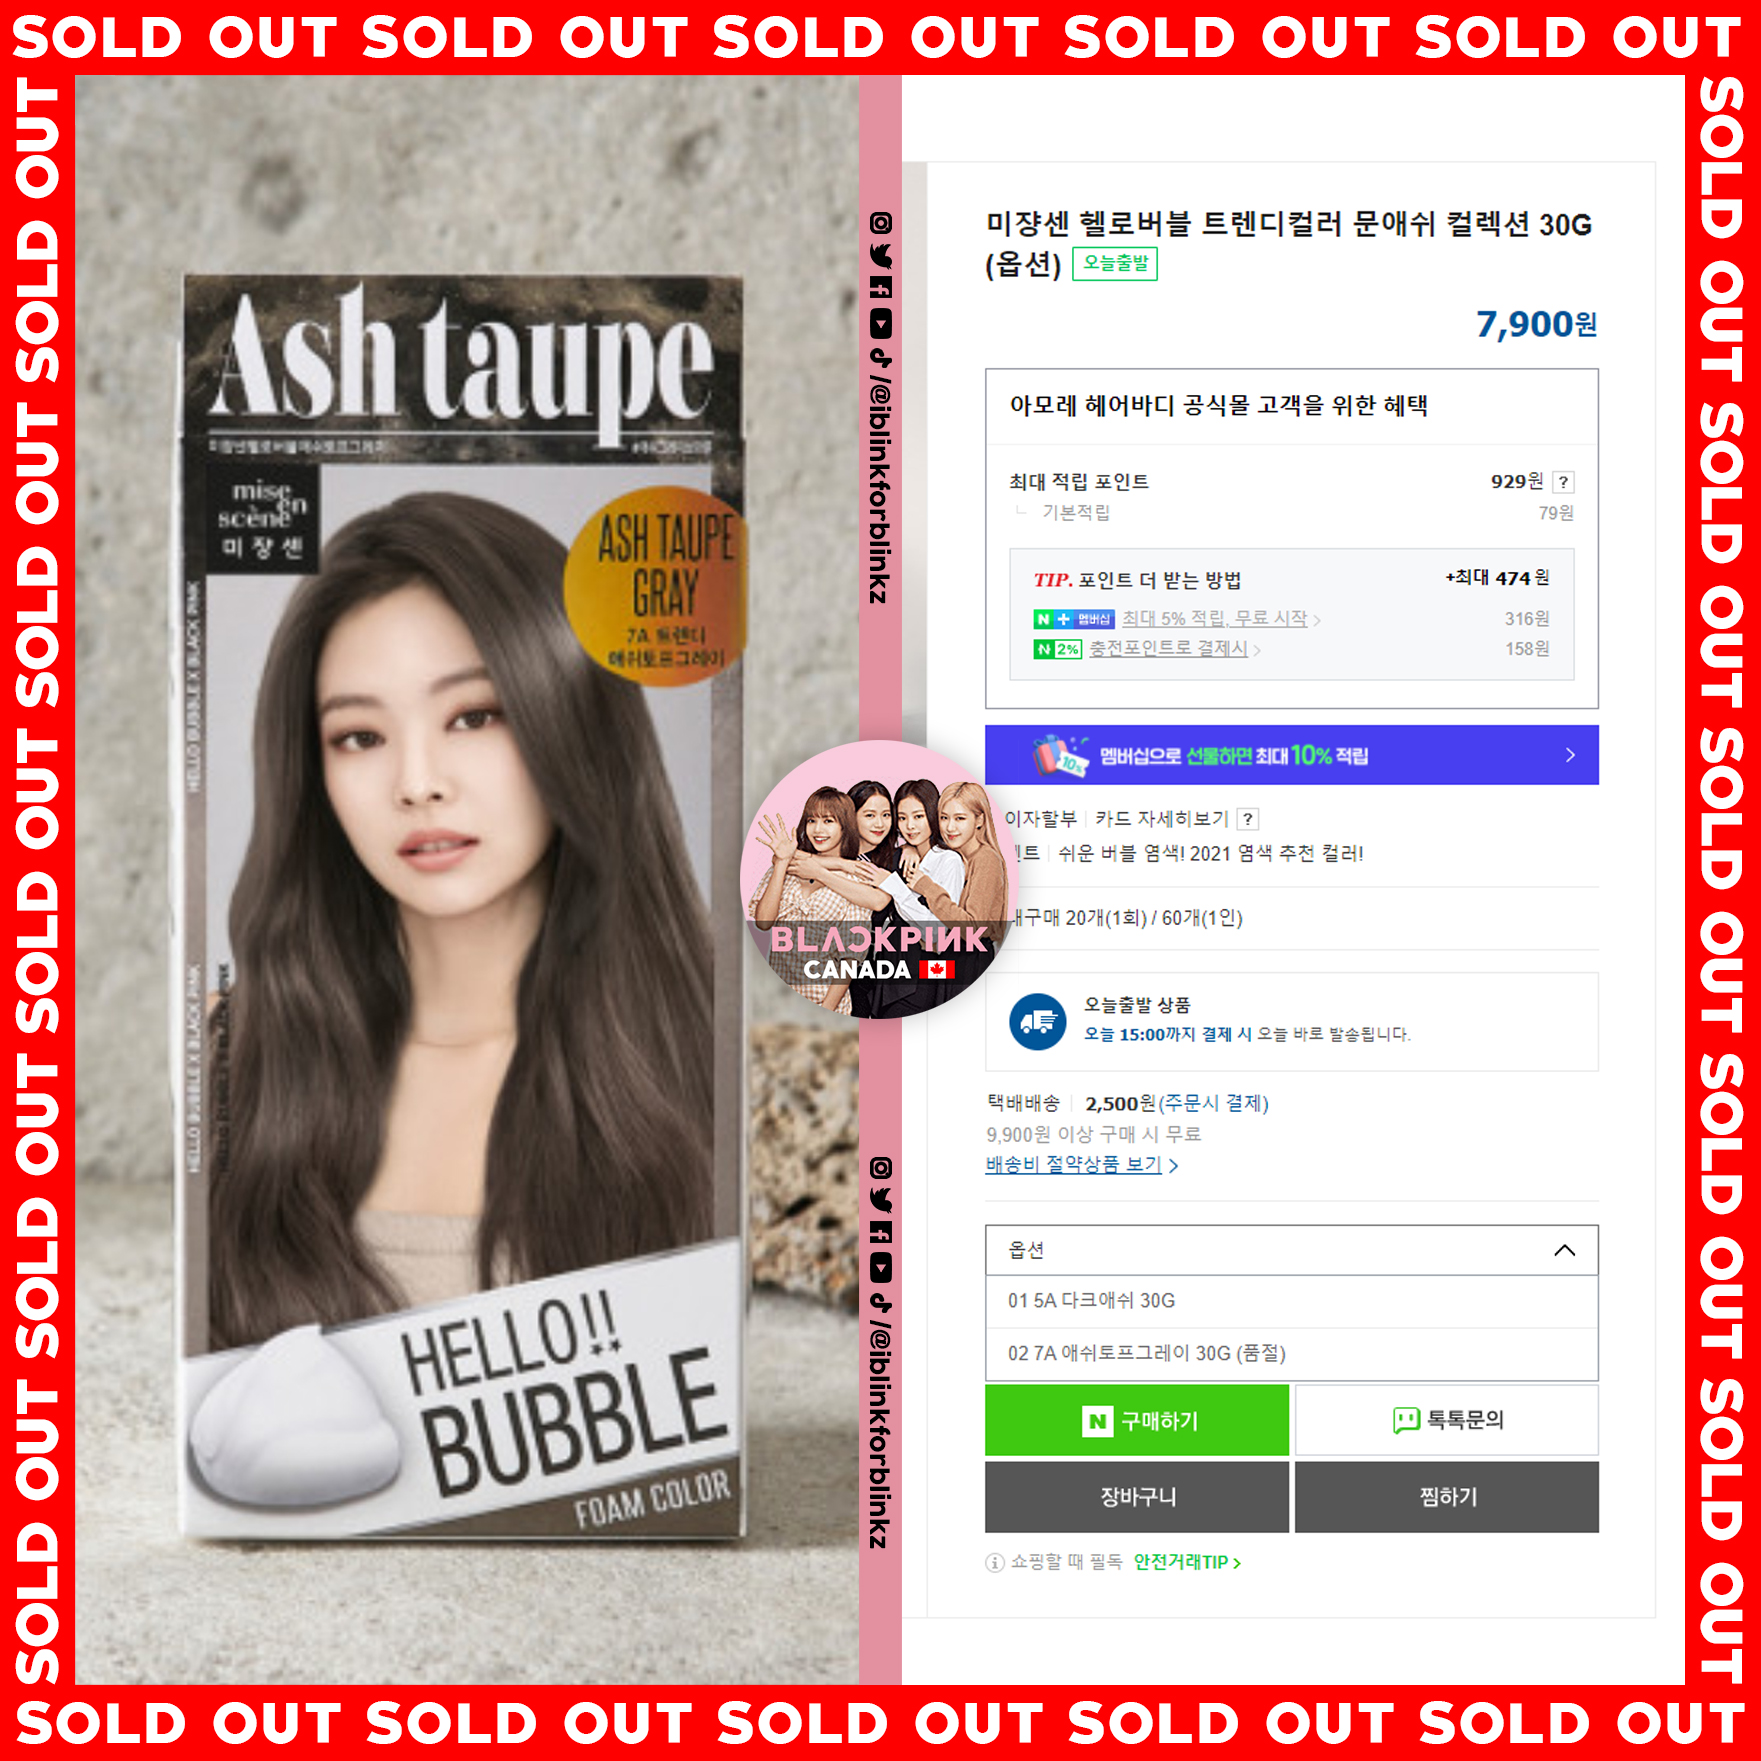 BLACKPINK CANADA 🇨🇦 2.0 on X: The power of JENNIE SOLD OUT item